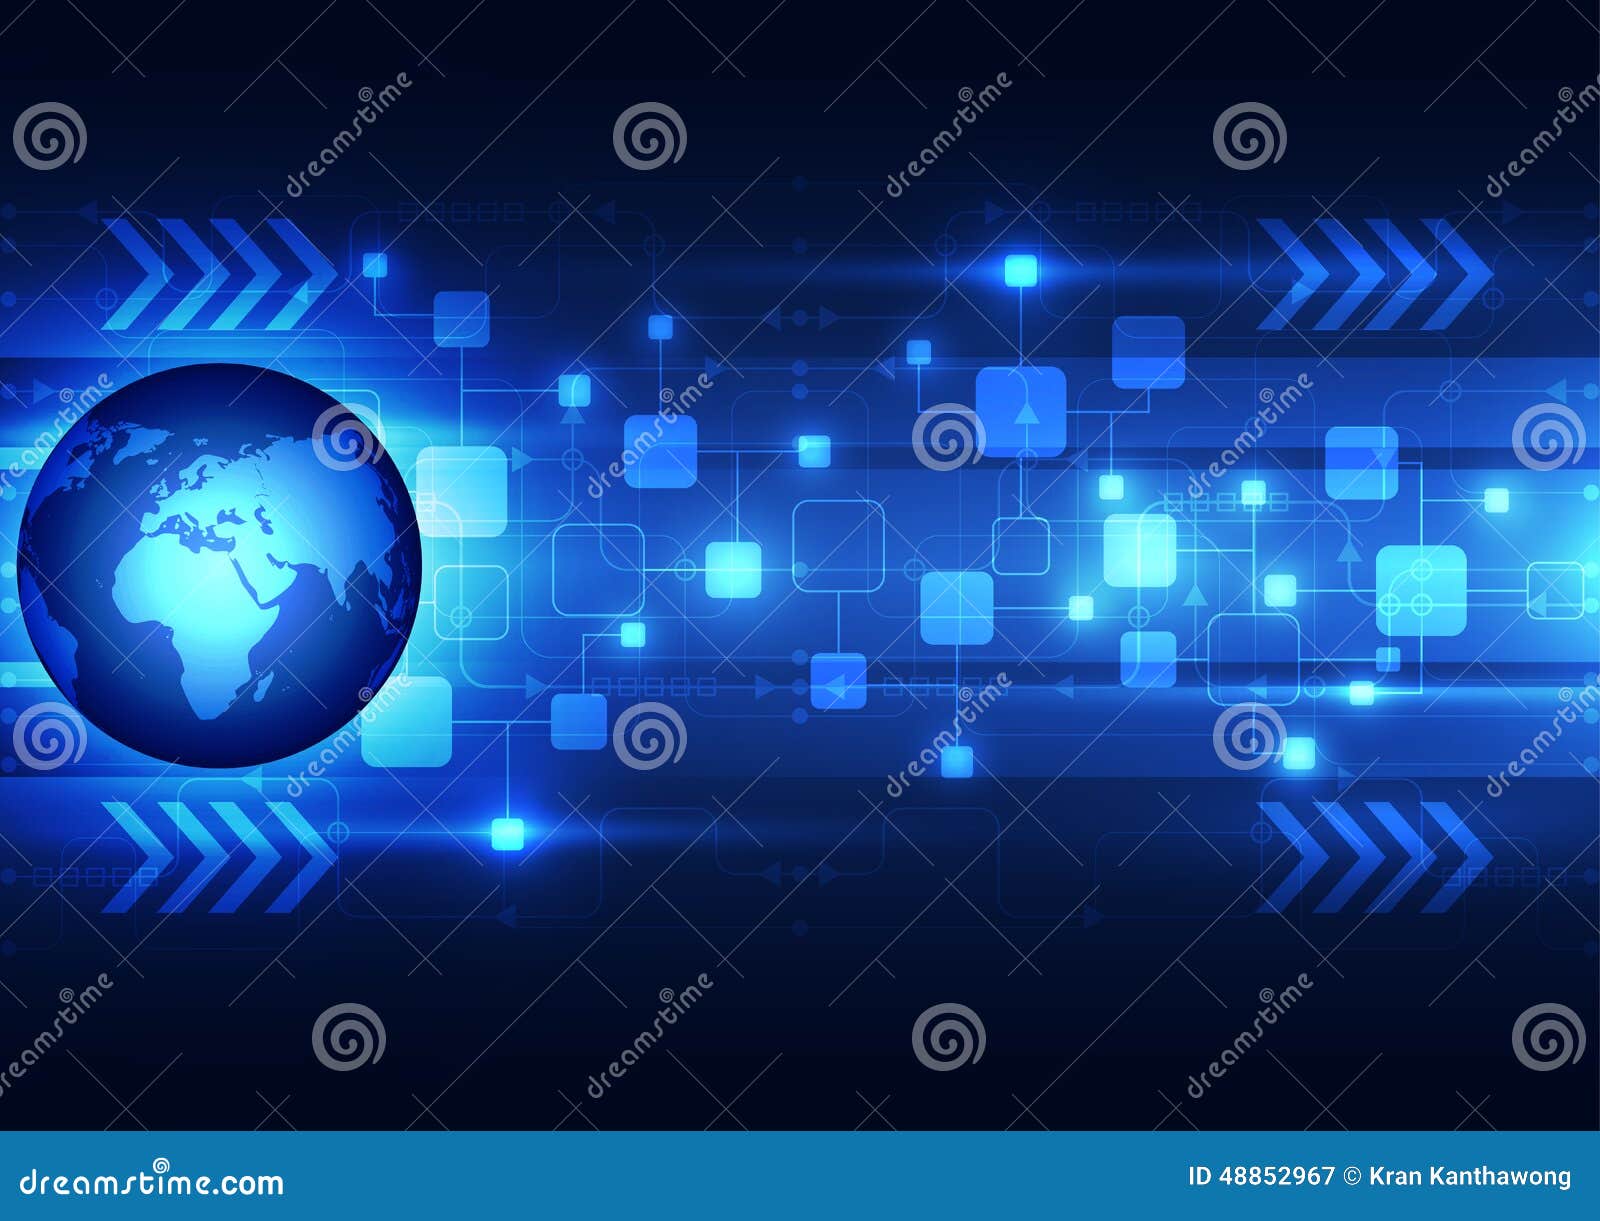  abstract global future technology, electric telecom background